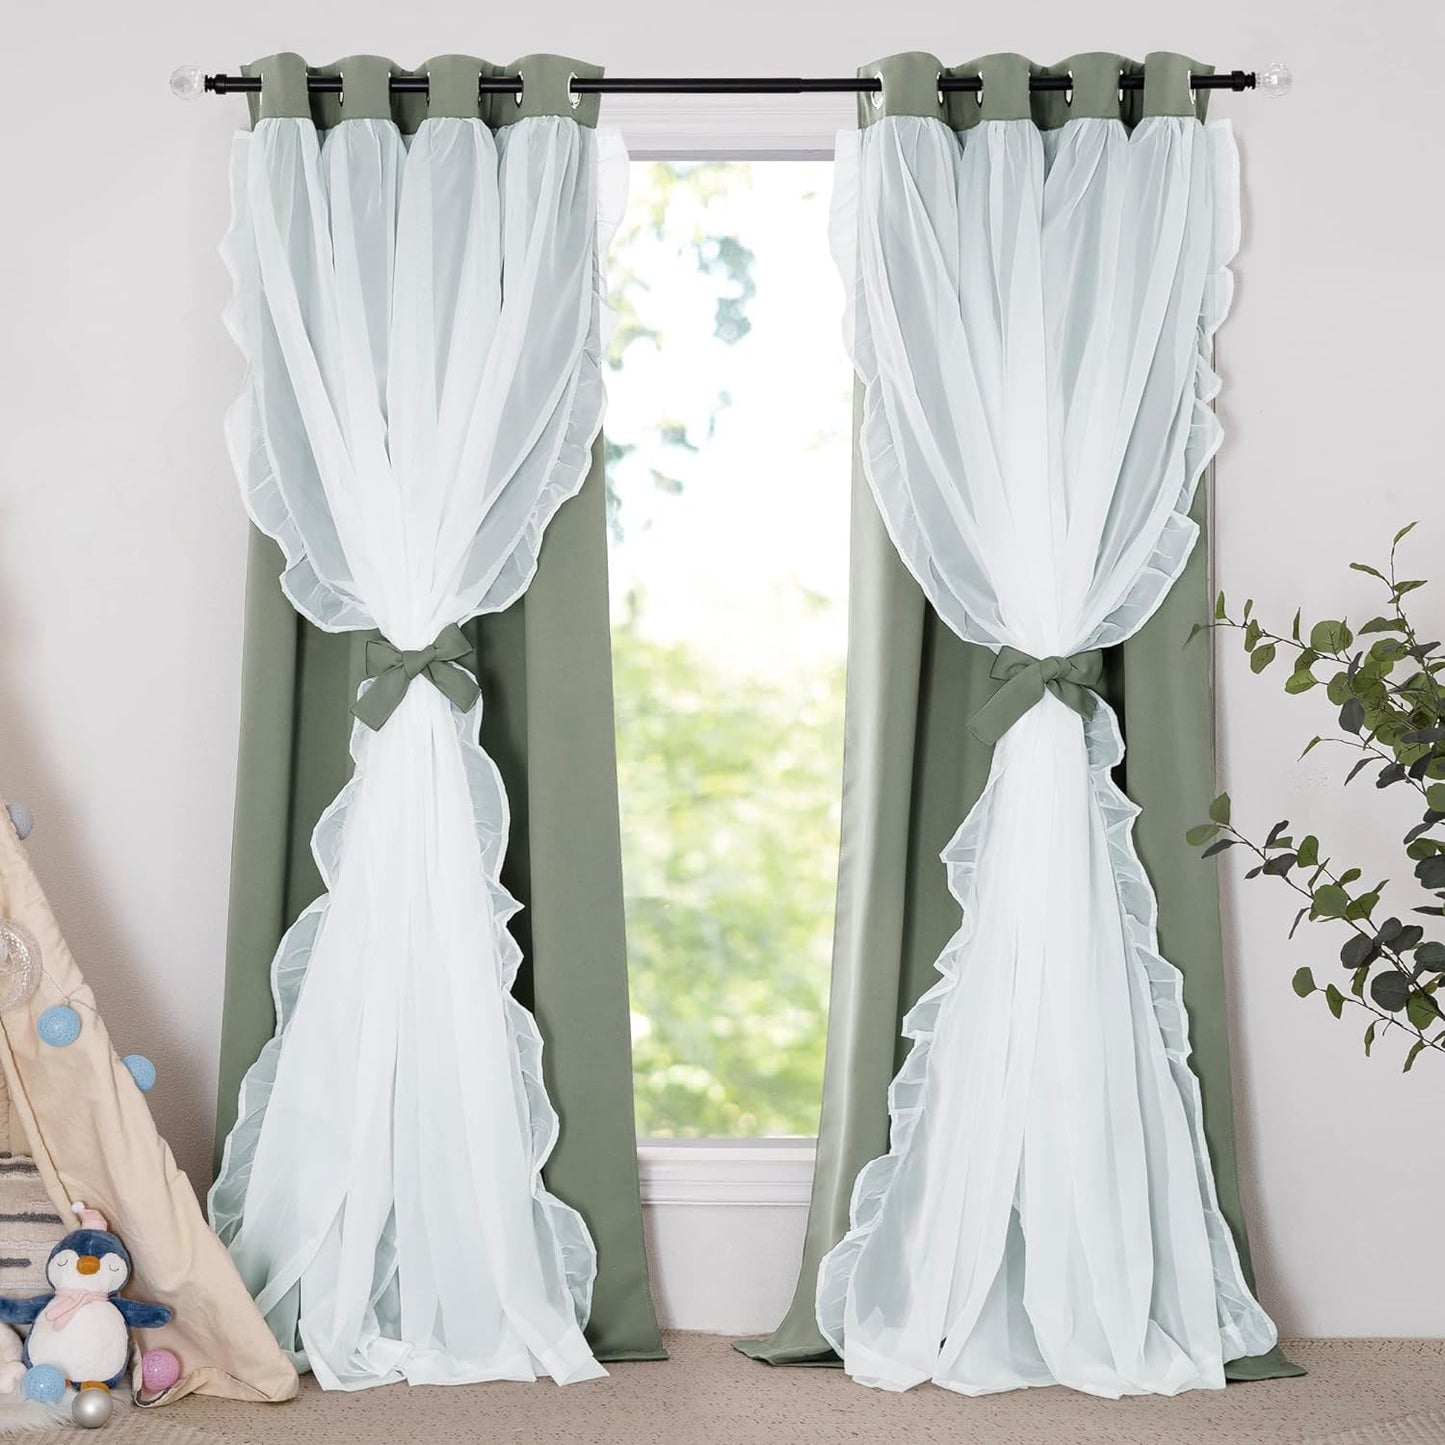 PONY DANCE Blackout Curtains for Living Room Decor Window Treatment Double Layer Drapes Ruffle Sheer Overlay Farmhouse Rustic Design, W 52 X L 84 Inches, Sage Green, 2 Panels  PONY DANCE Sage Green 52" X 95" 